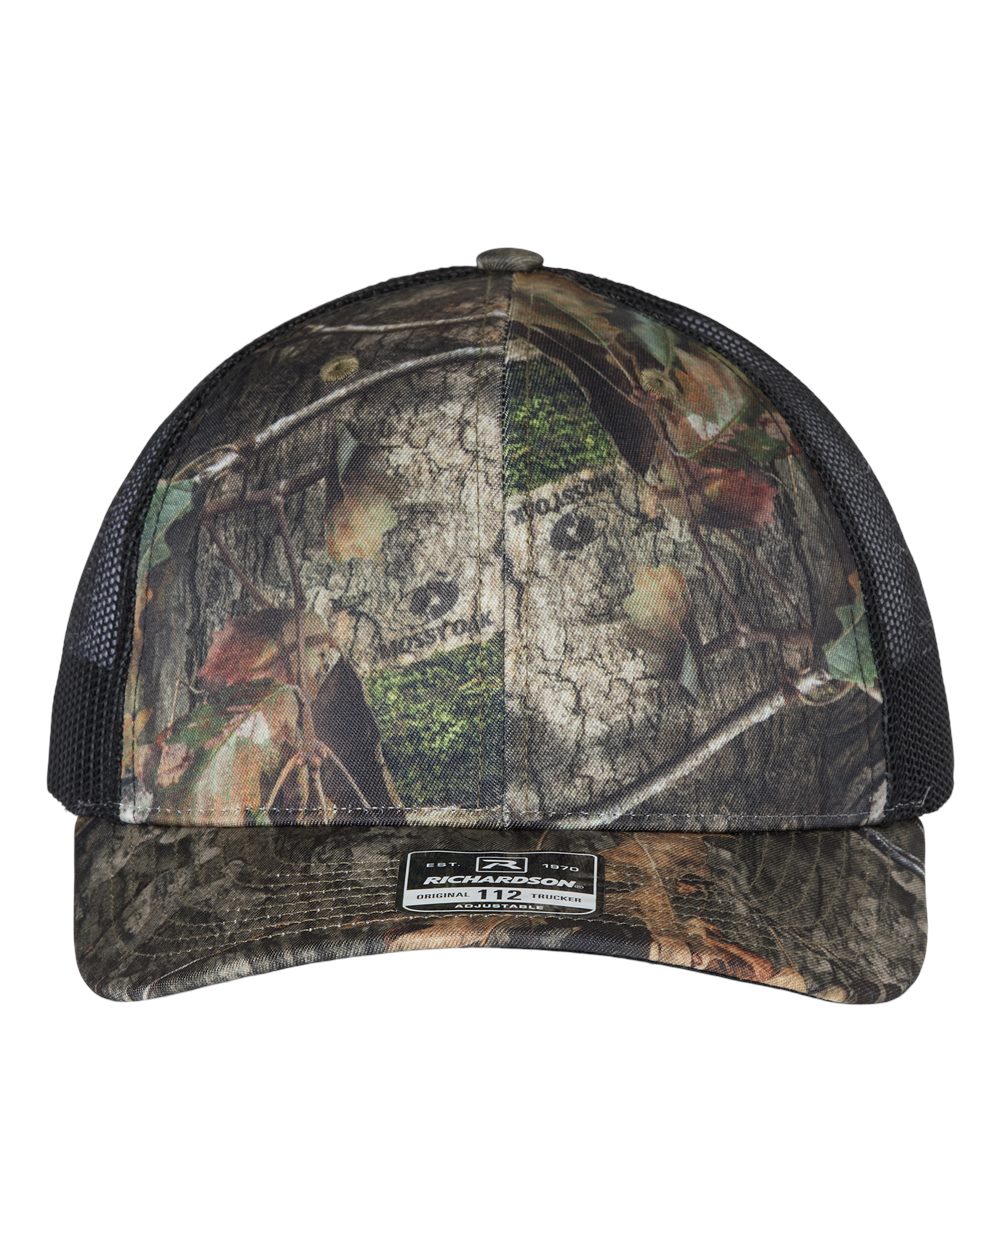 click to view Mossy Oak Country DNA/ Black